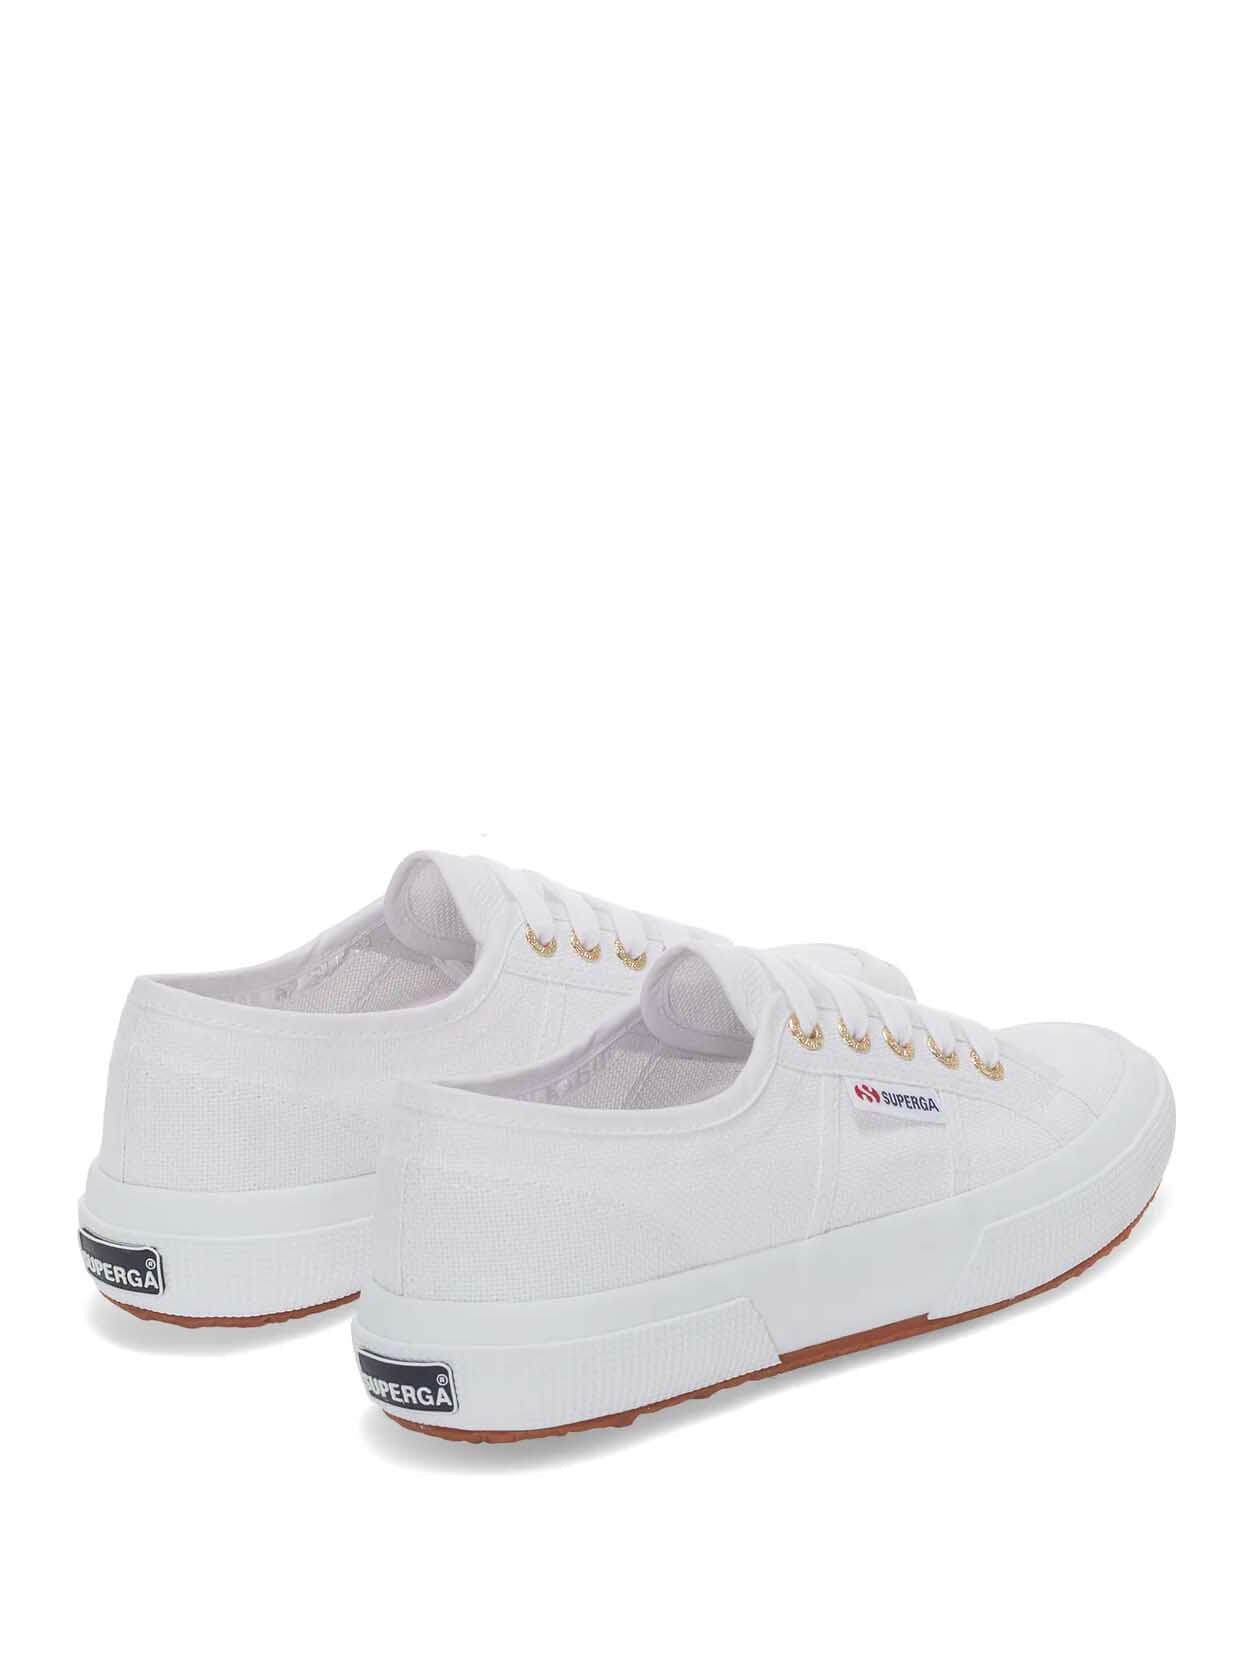 Superga 2750 Beads Classic Sneaker White with Beads | Sneakers white,  Classic sneakers, Sneakers